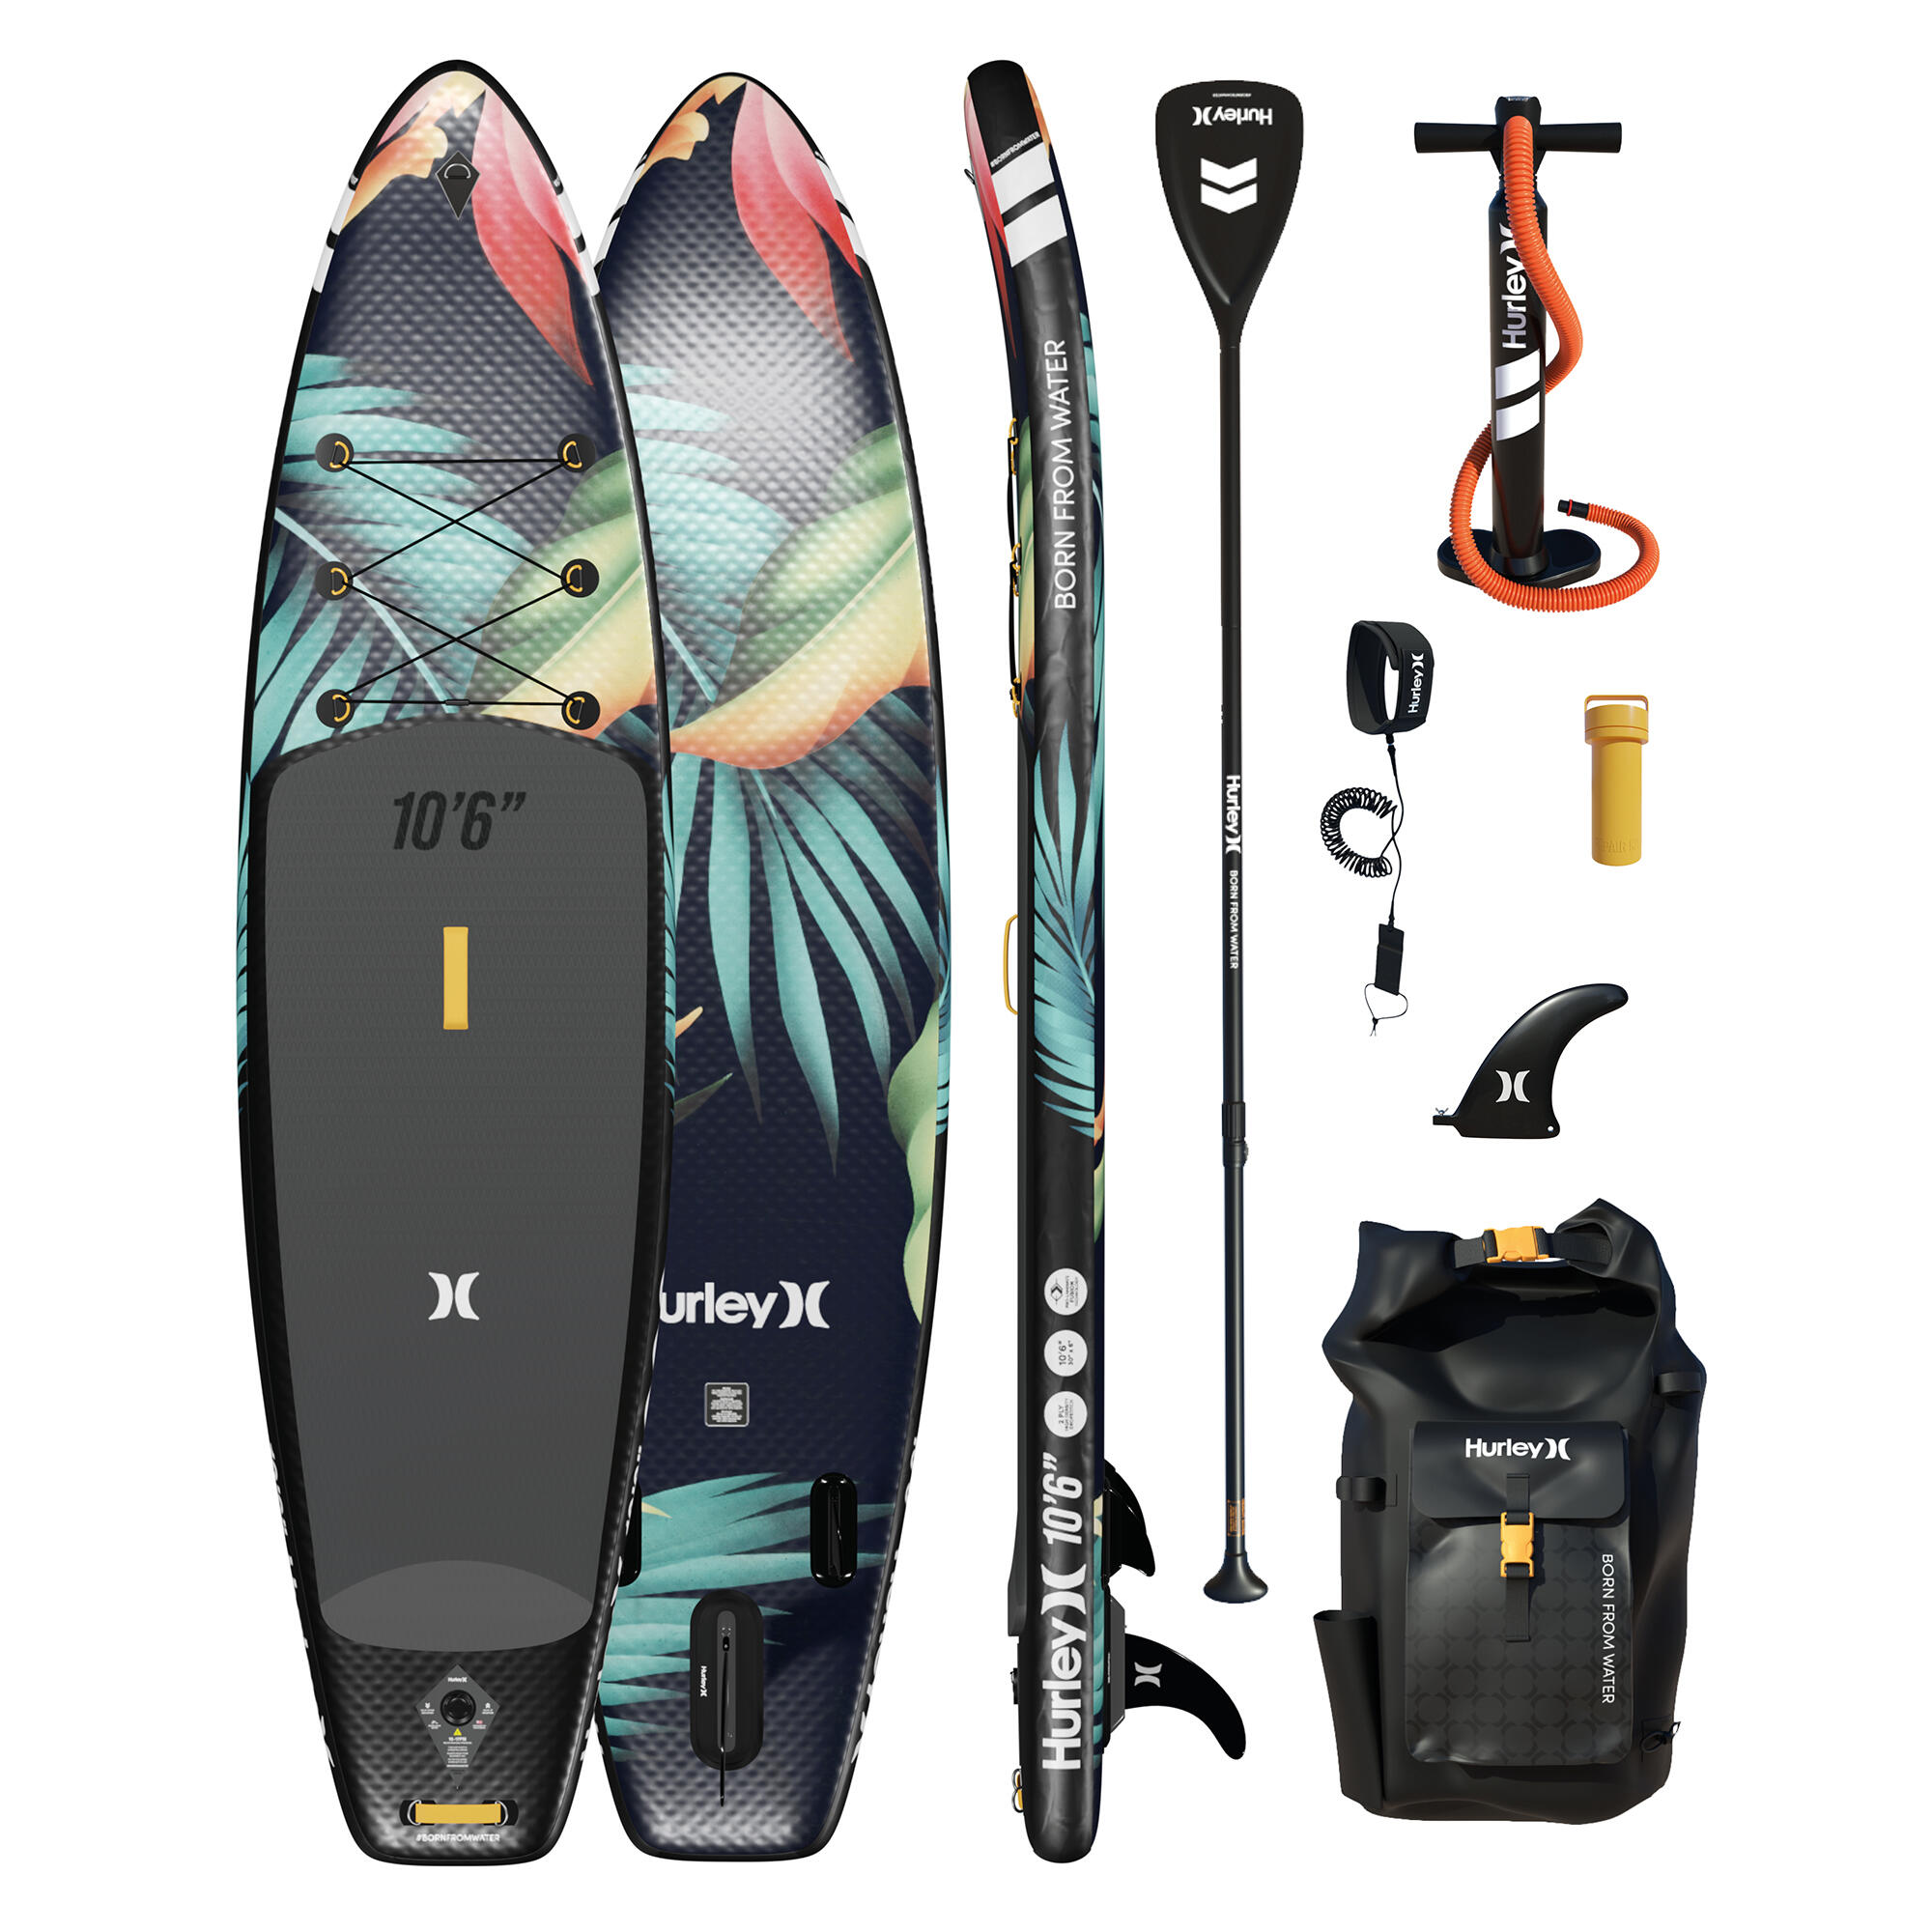 Hurley Phantomtour PARADISE 10'6 Inflatable Paddle Board Package 1/6